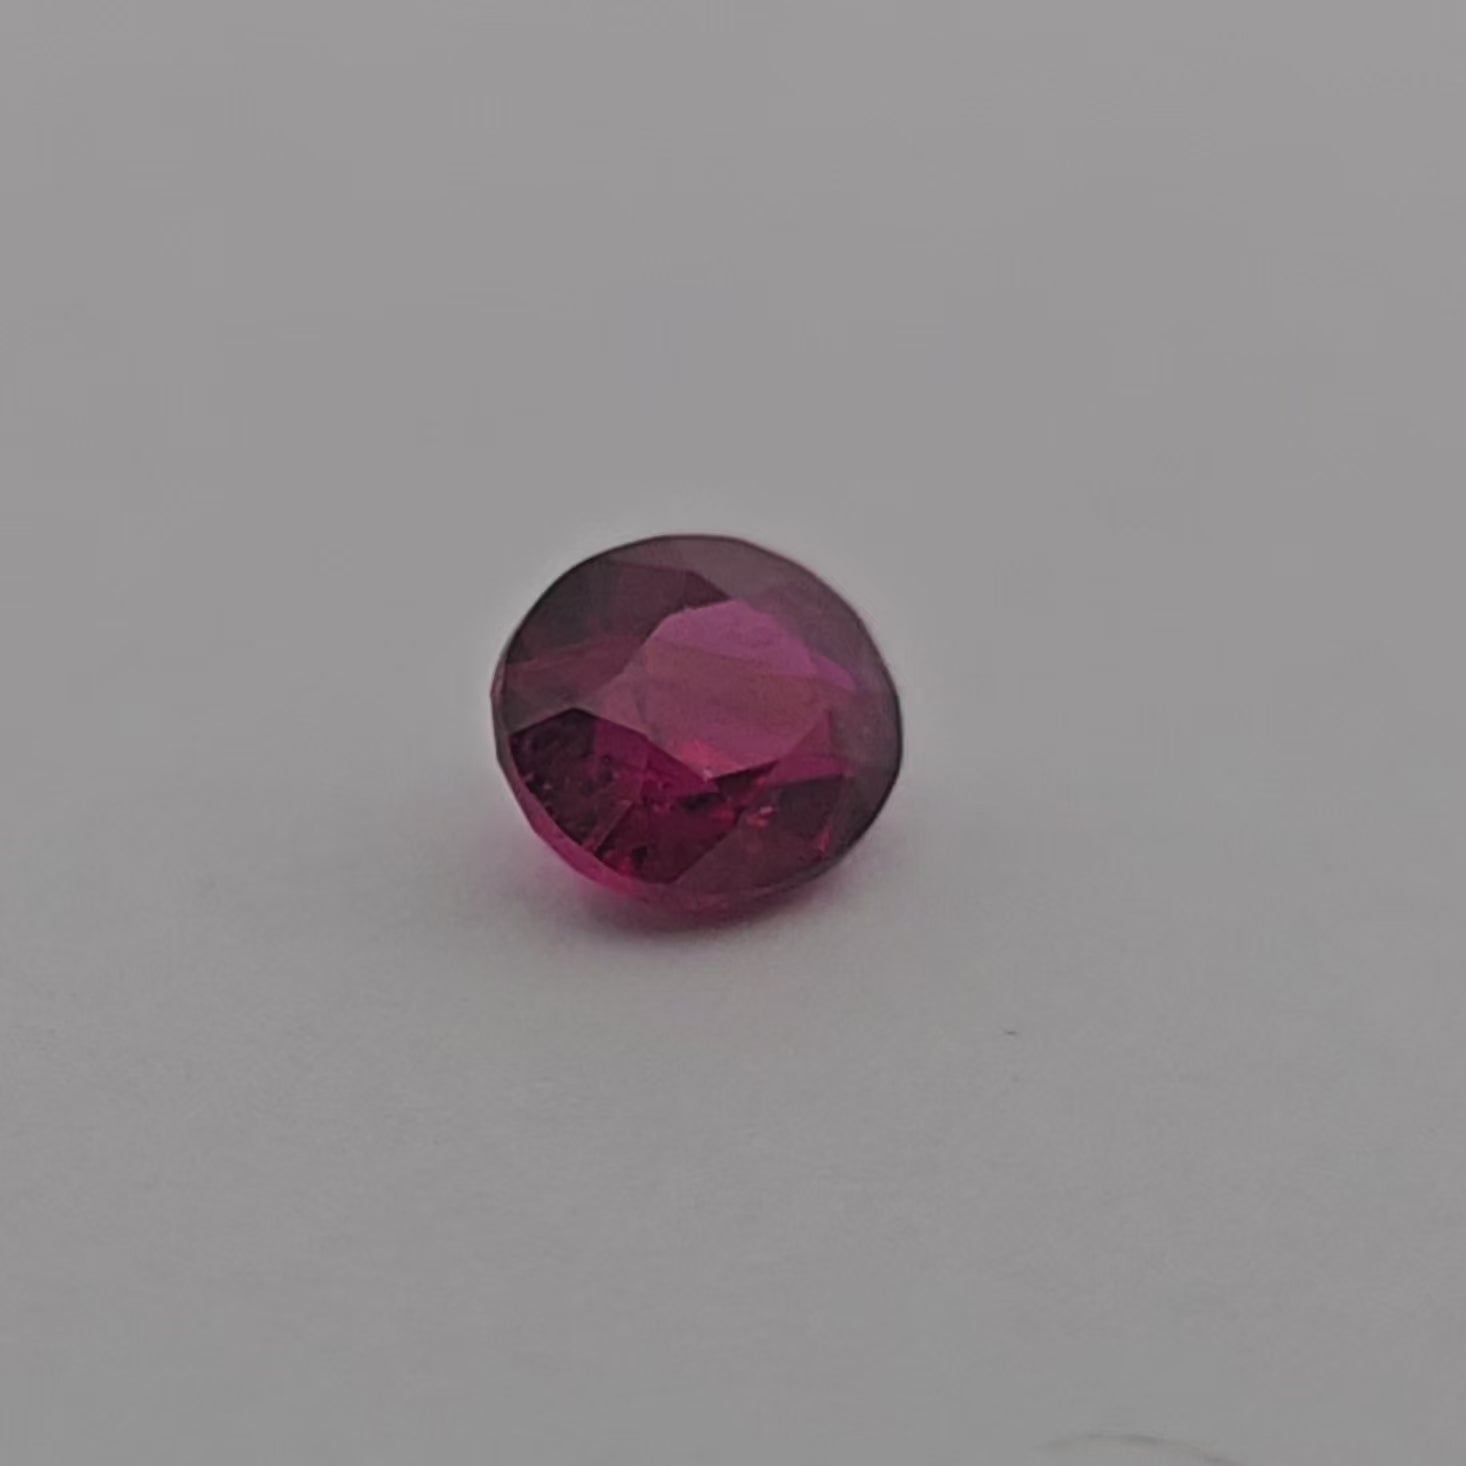 Natural Mozambique Ruby Manik Stone 1.18 Carats Oval Cut